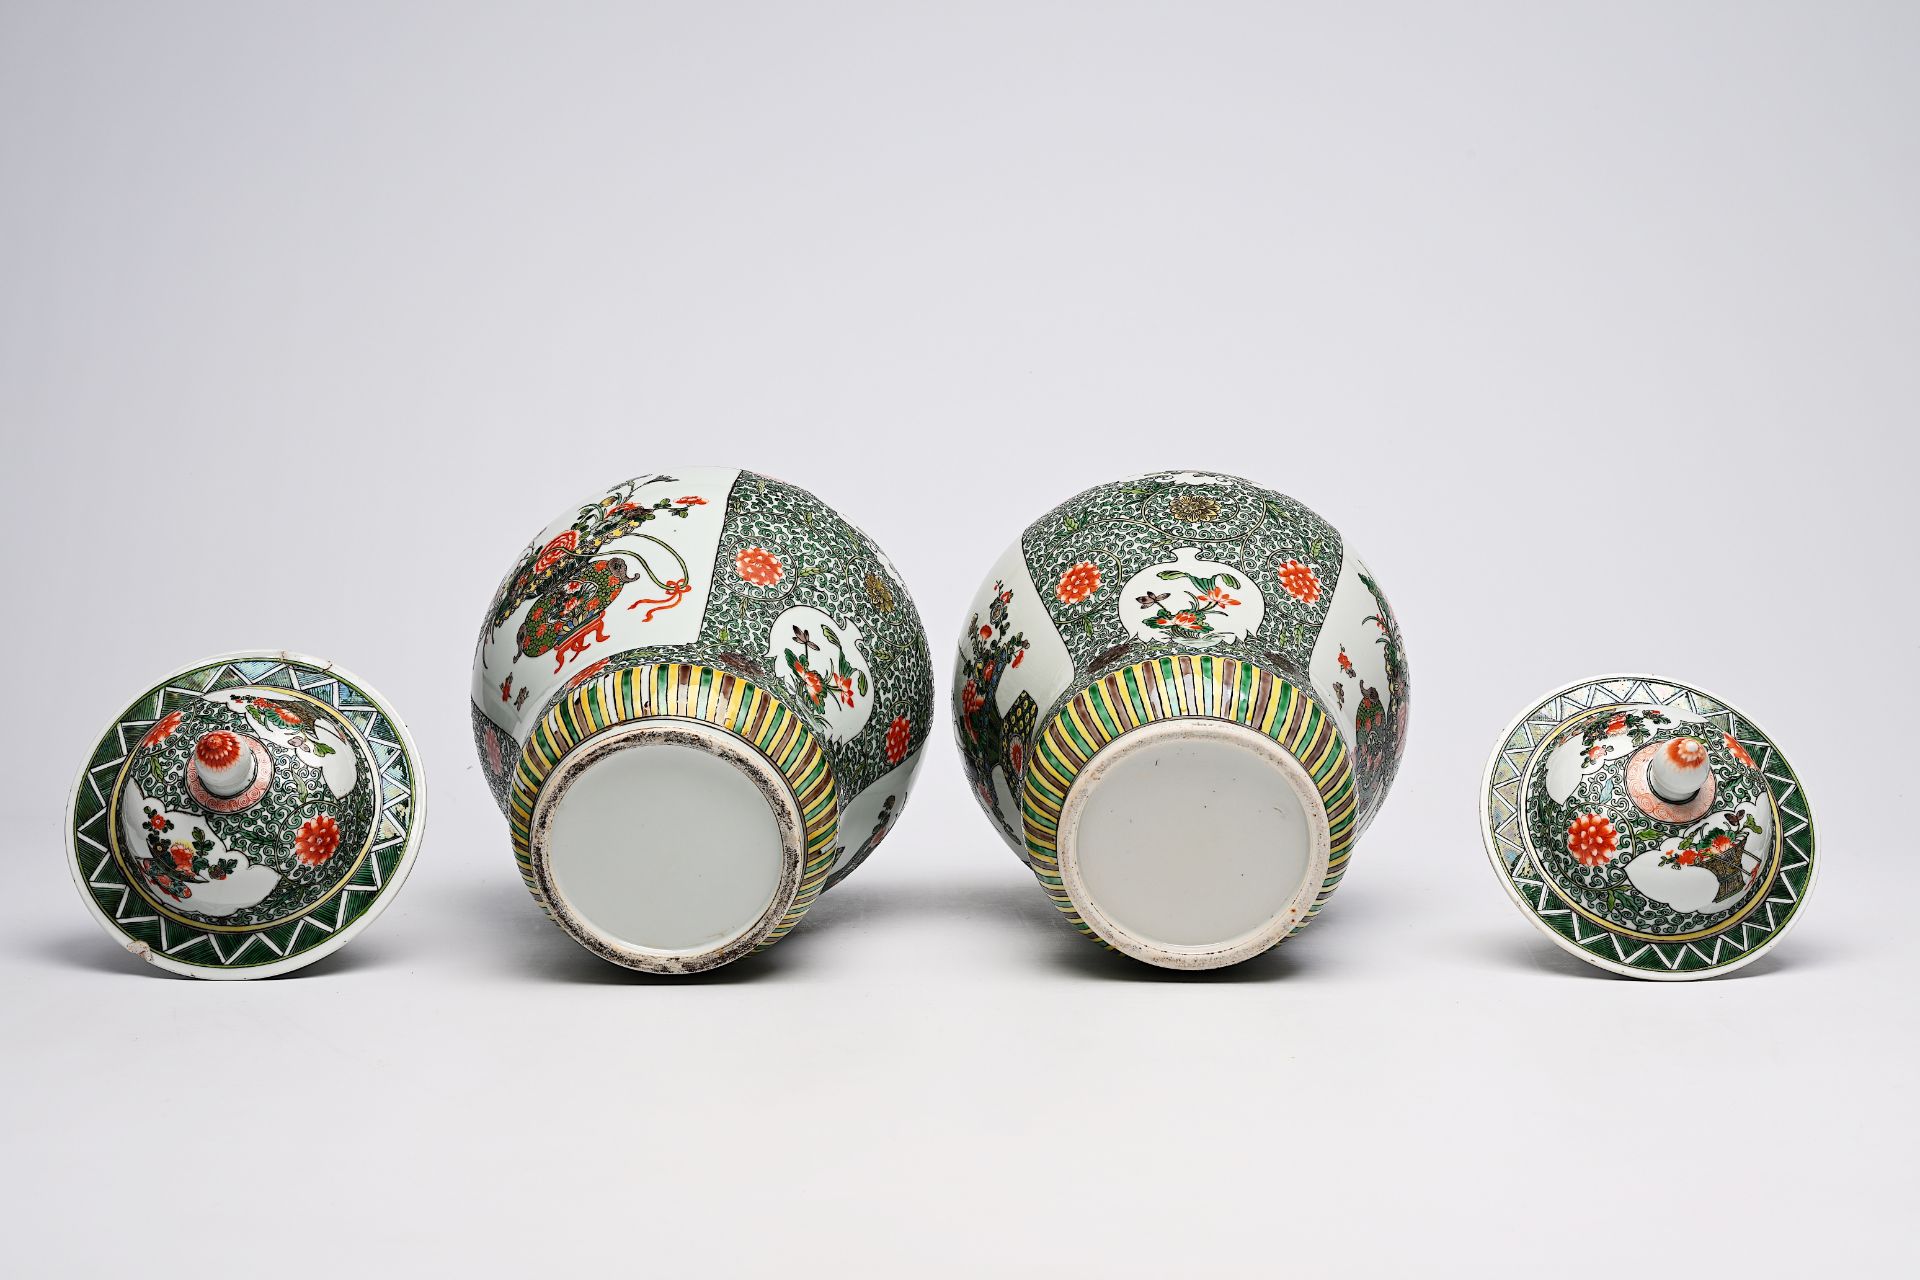 A pair of Chinese famille verte vases and covers with flower baskets and floral design, 19th C. - Image 12 of 16